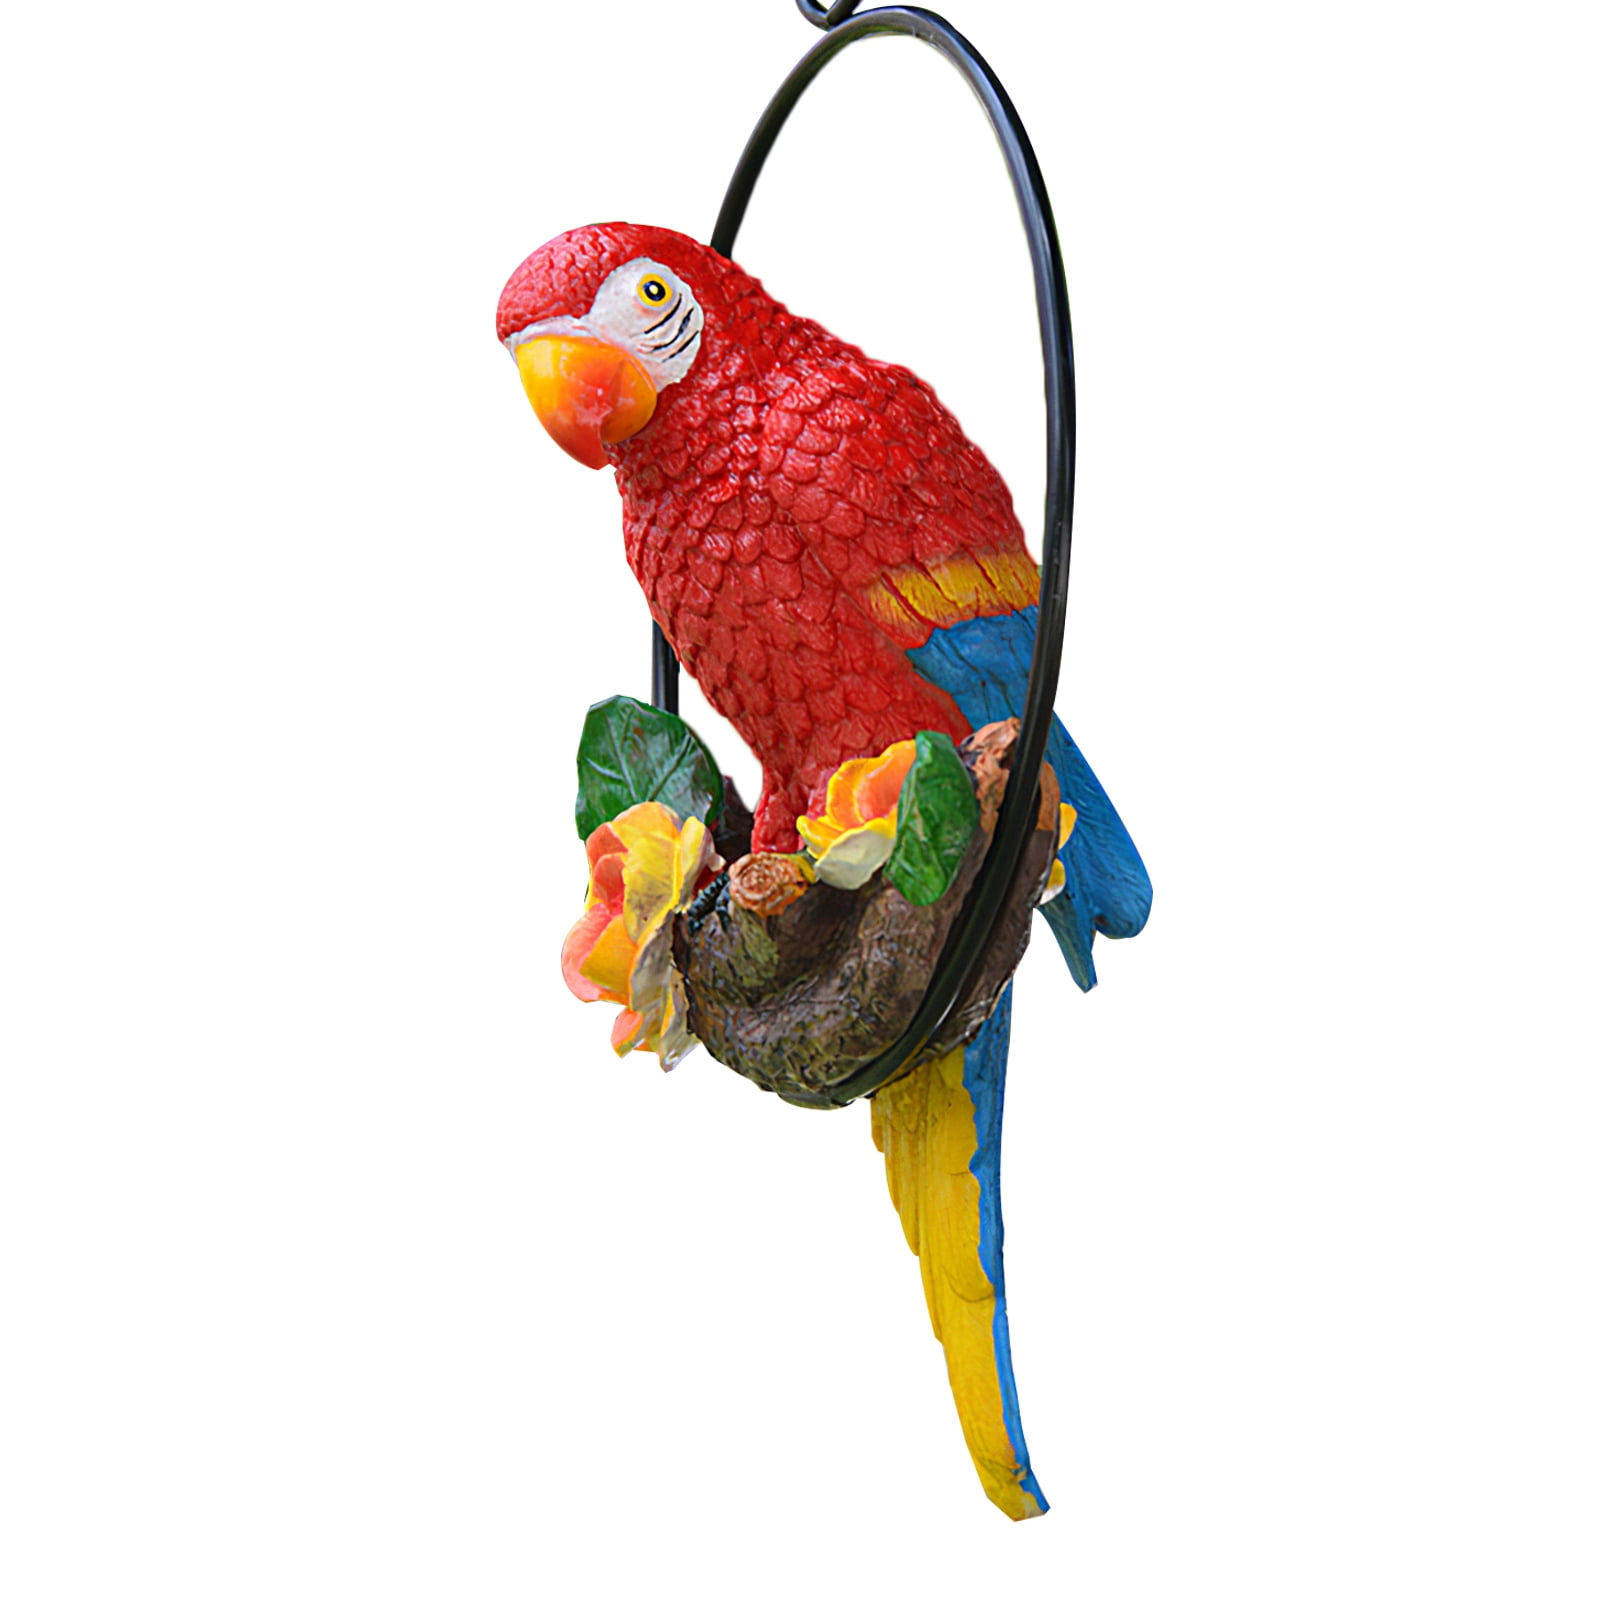 Home Hanging Wall Decor Tropics Vibrant Colored Macaw Parrot Resin Wall Statue 